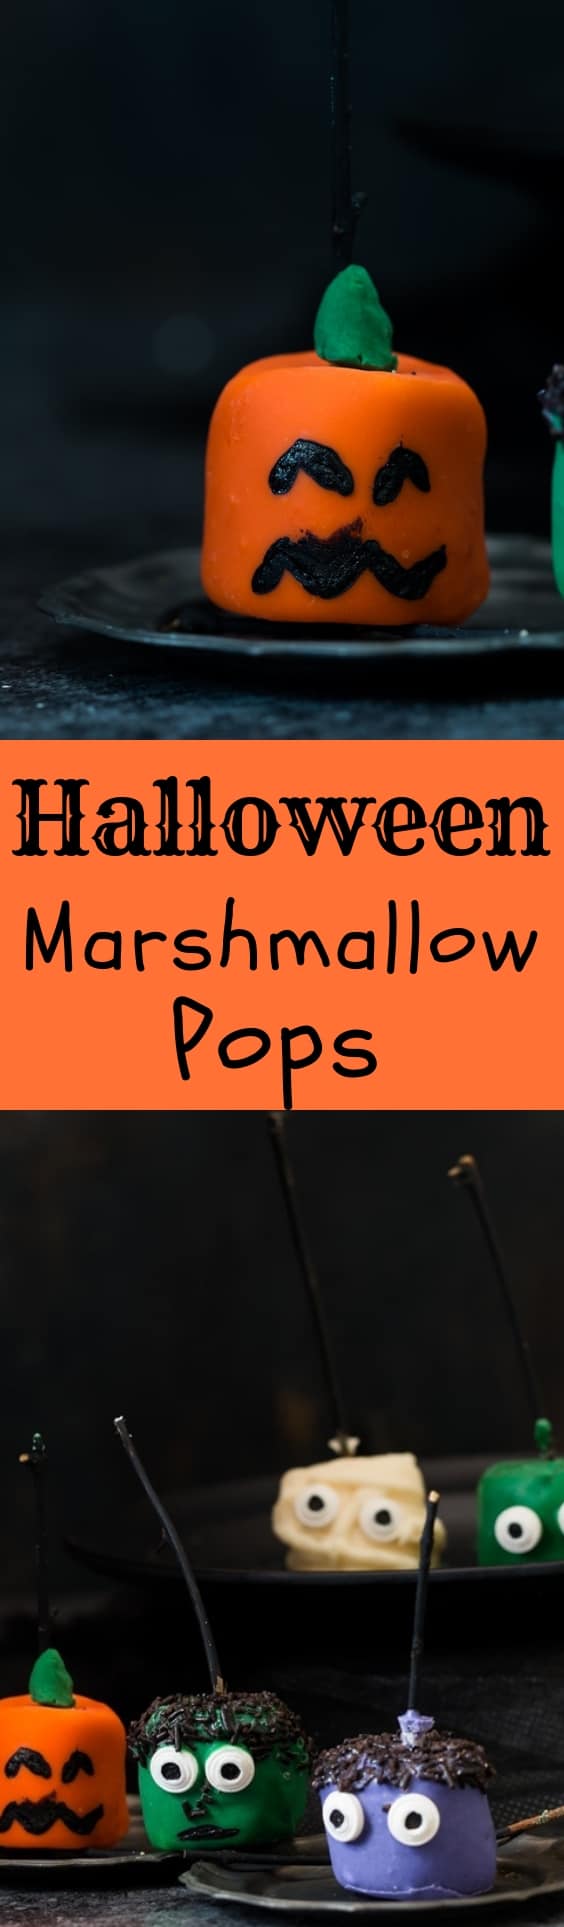 halloween marshmallow pops with text overlay